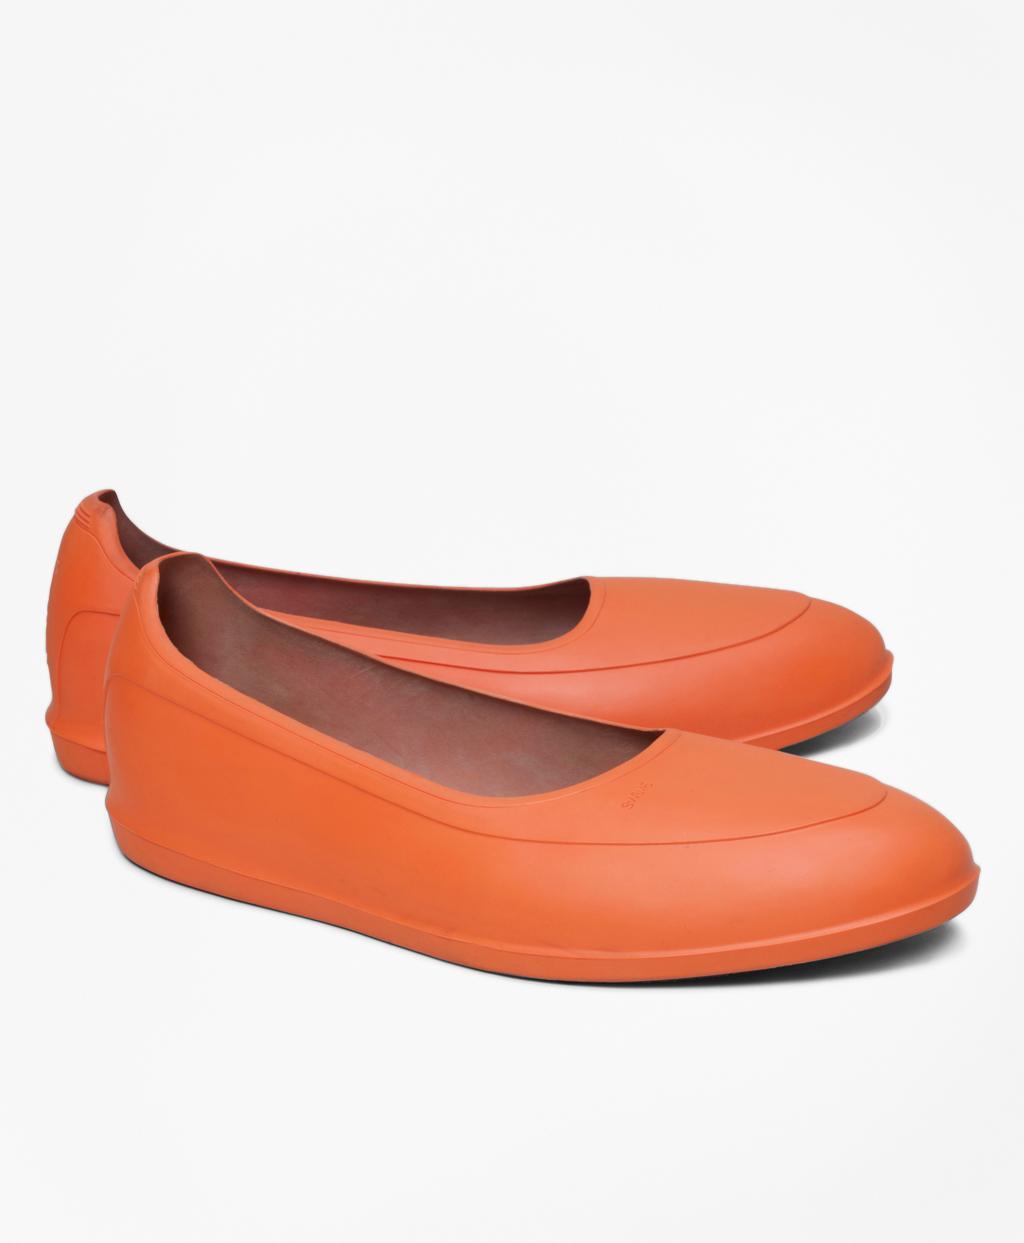 Brooks Brothers Rubber Swims Brand Galoshes in Orange for Men - Lyst